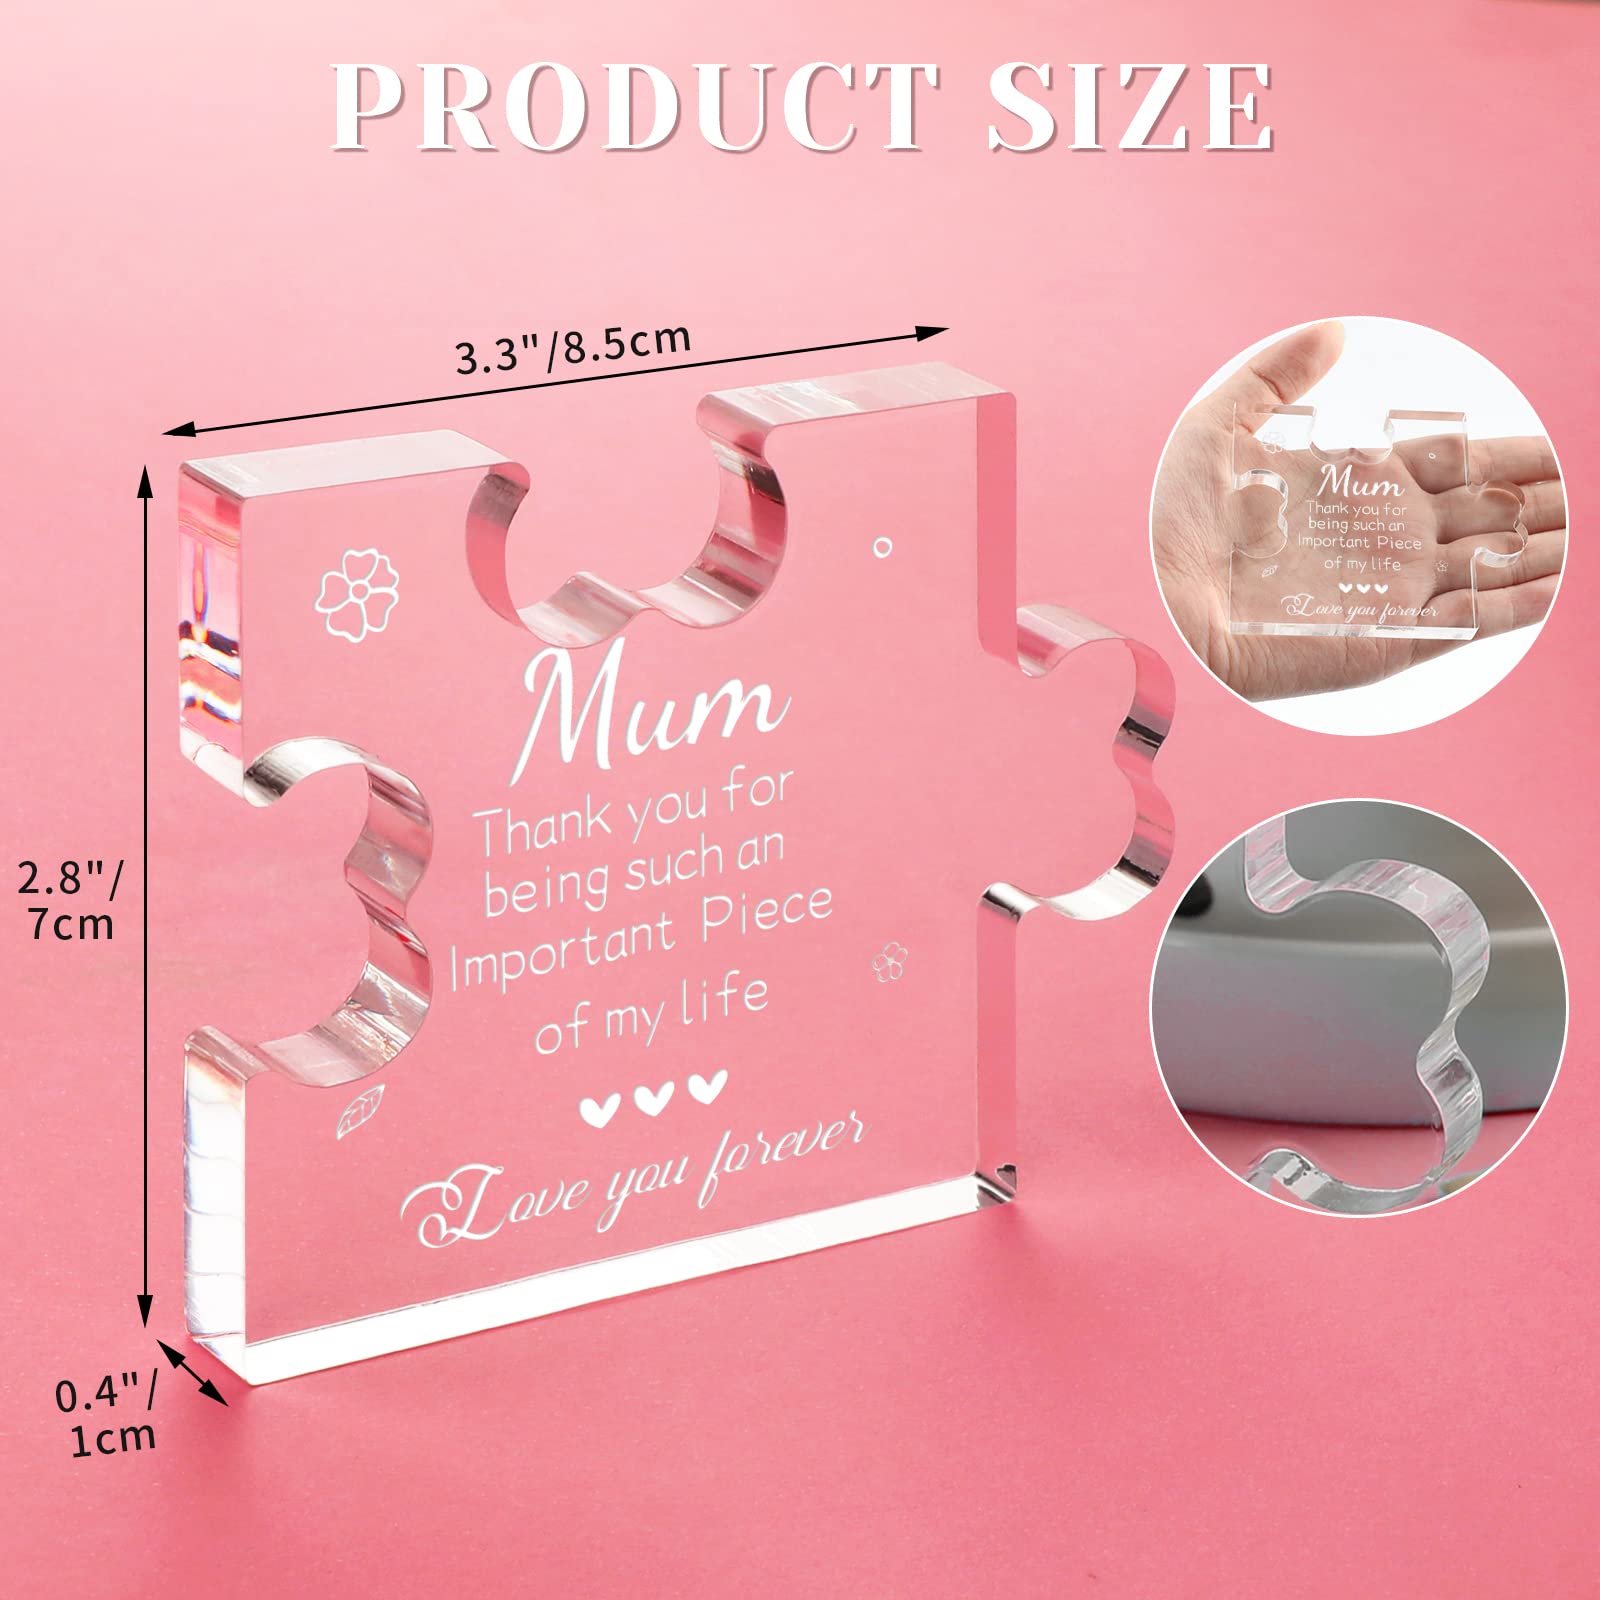 Funnli Gifts for Mum, Engraved Acrylic Block Puzzle Mum Gifts, 3.35 x 2.76 Inch Table Decoration Mum Mummy Presents, Mothers Day Birthday Gifts for Mum from Daughter Son